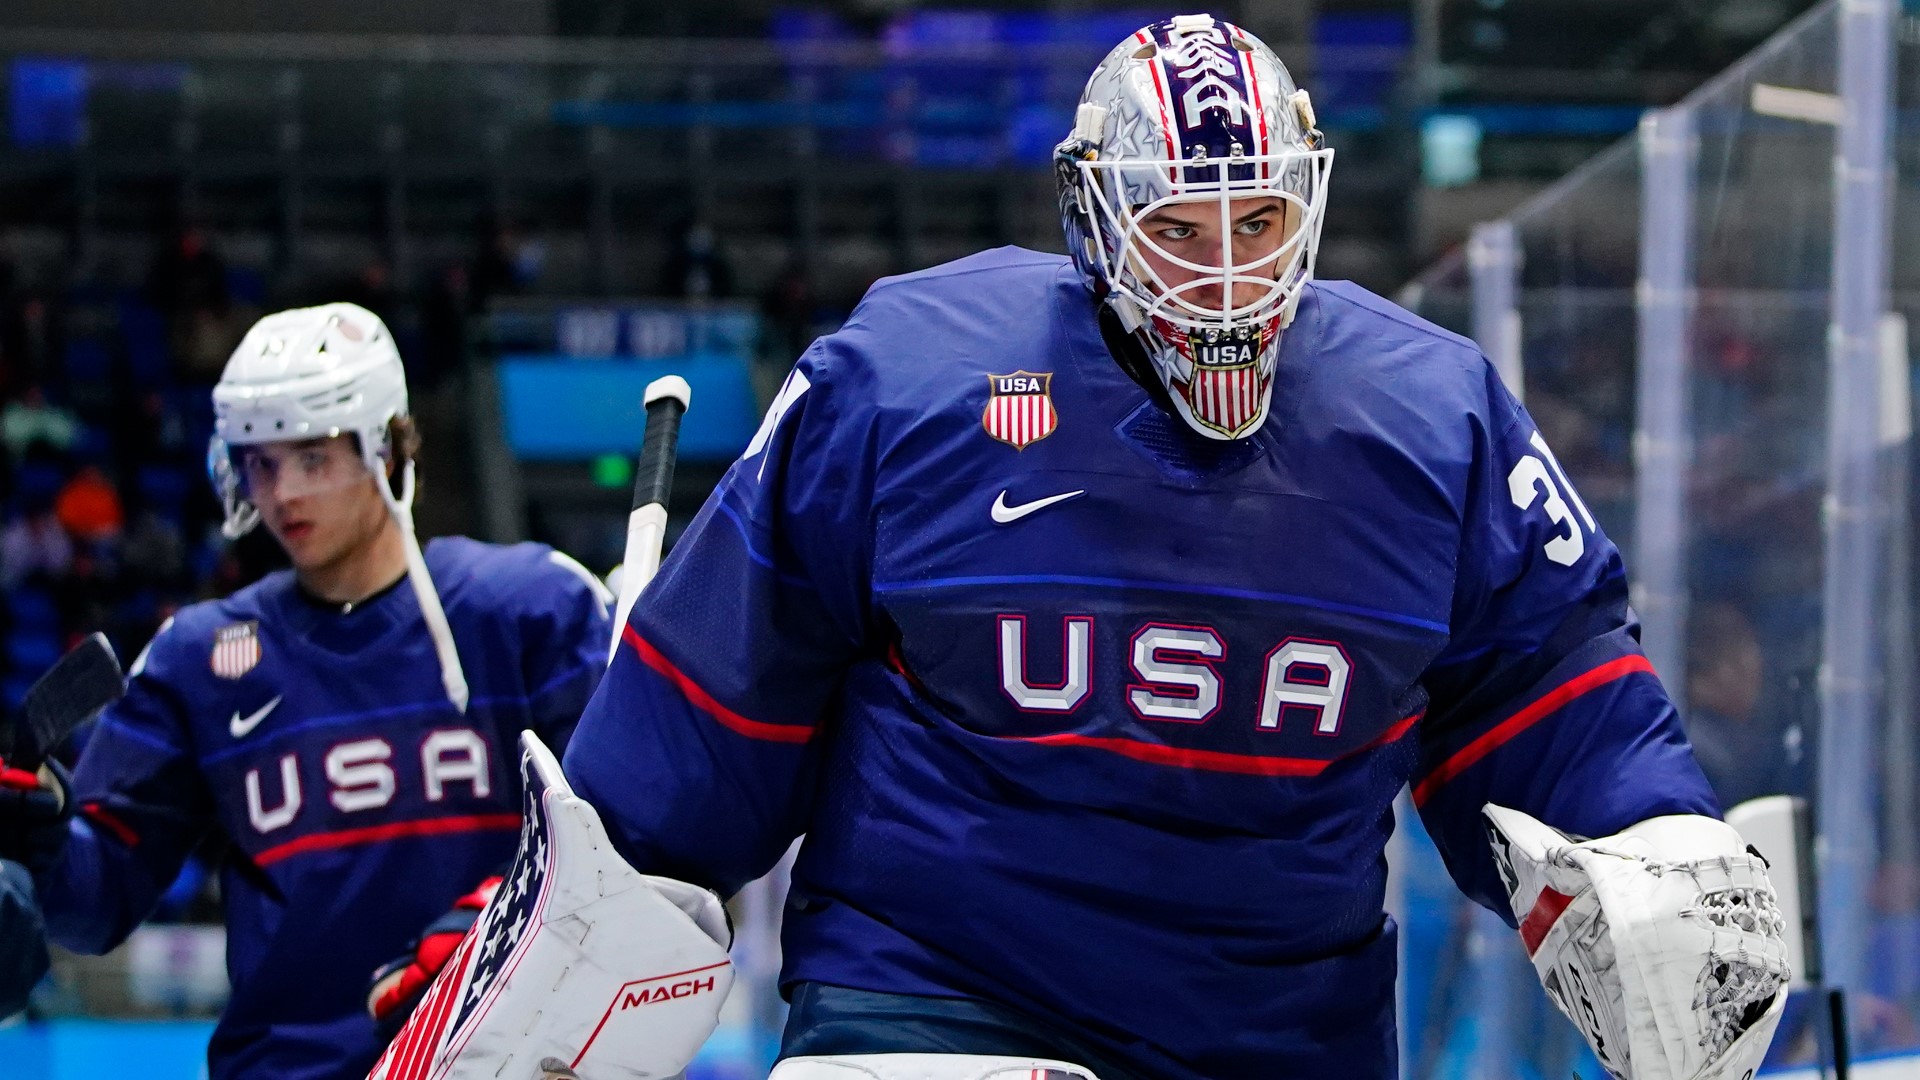 Only one U.S. hockey team will be playing for a medal at the Beijing Winter Olympics.